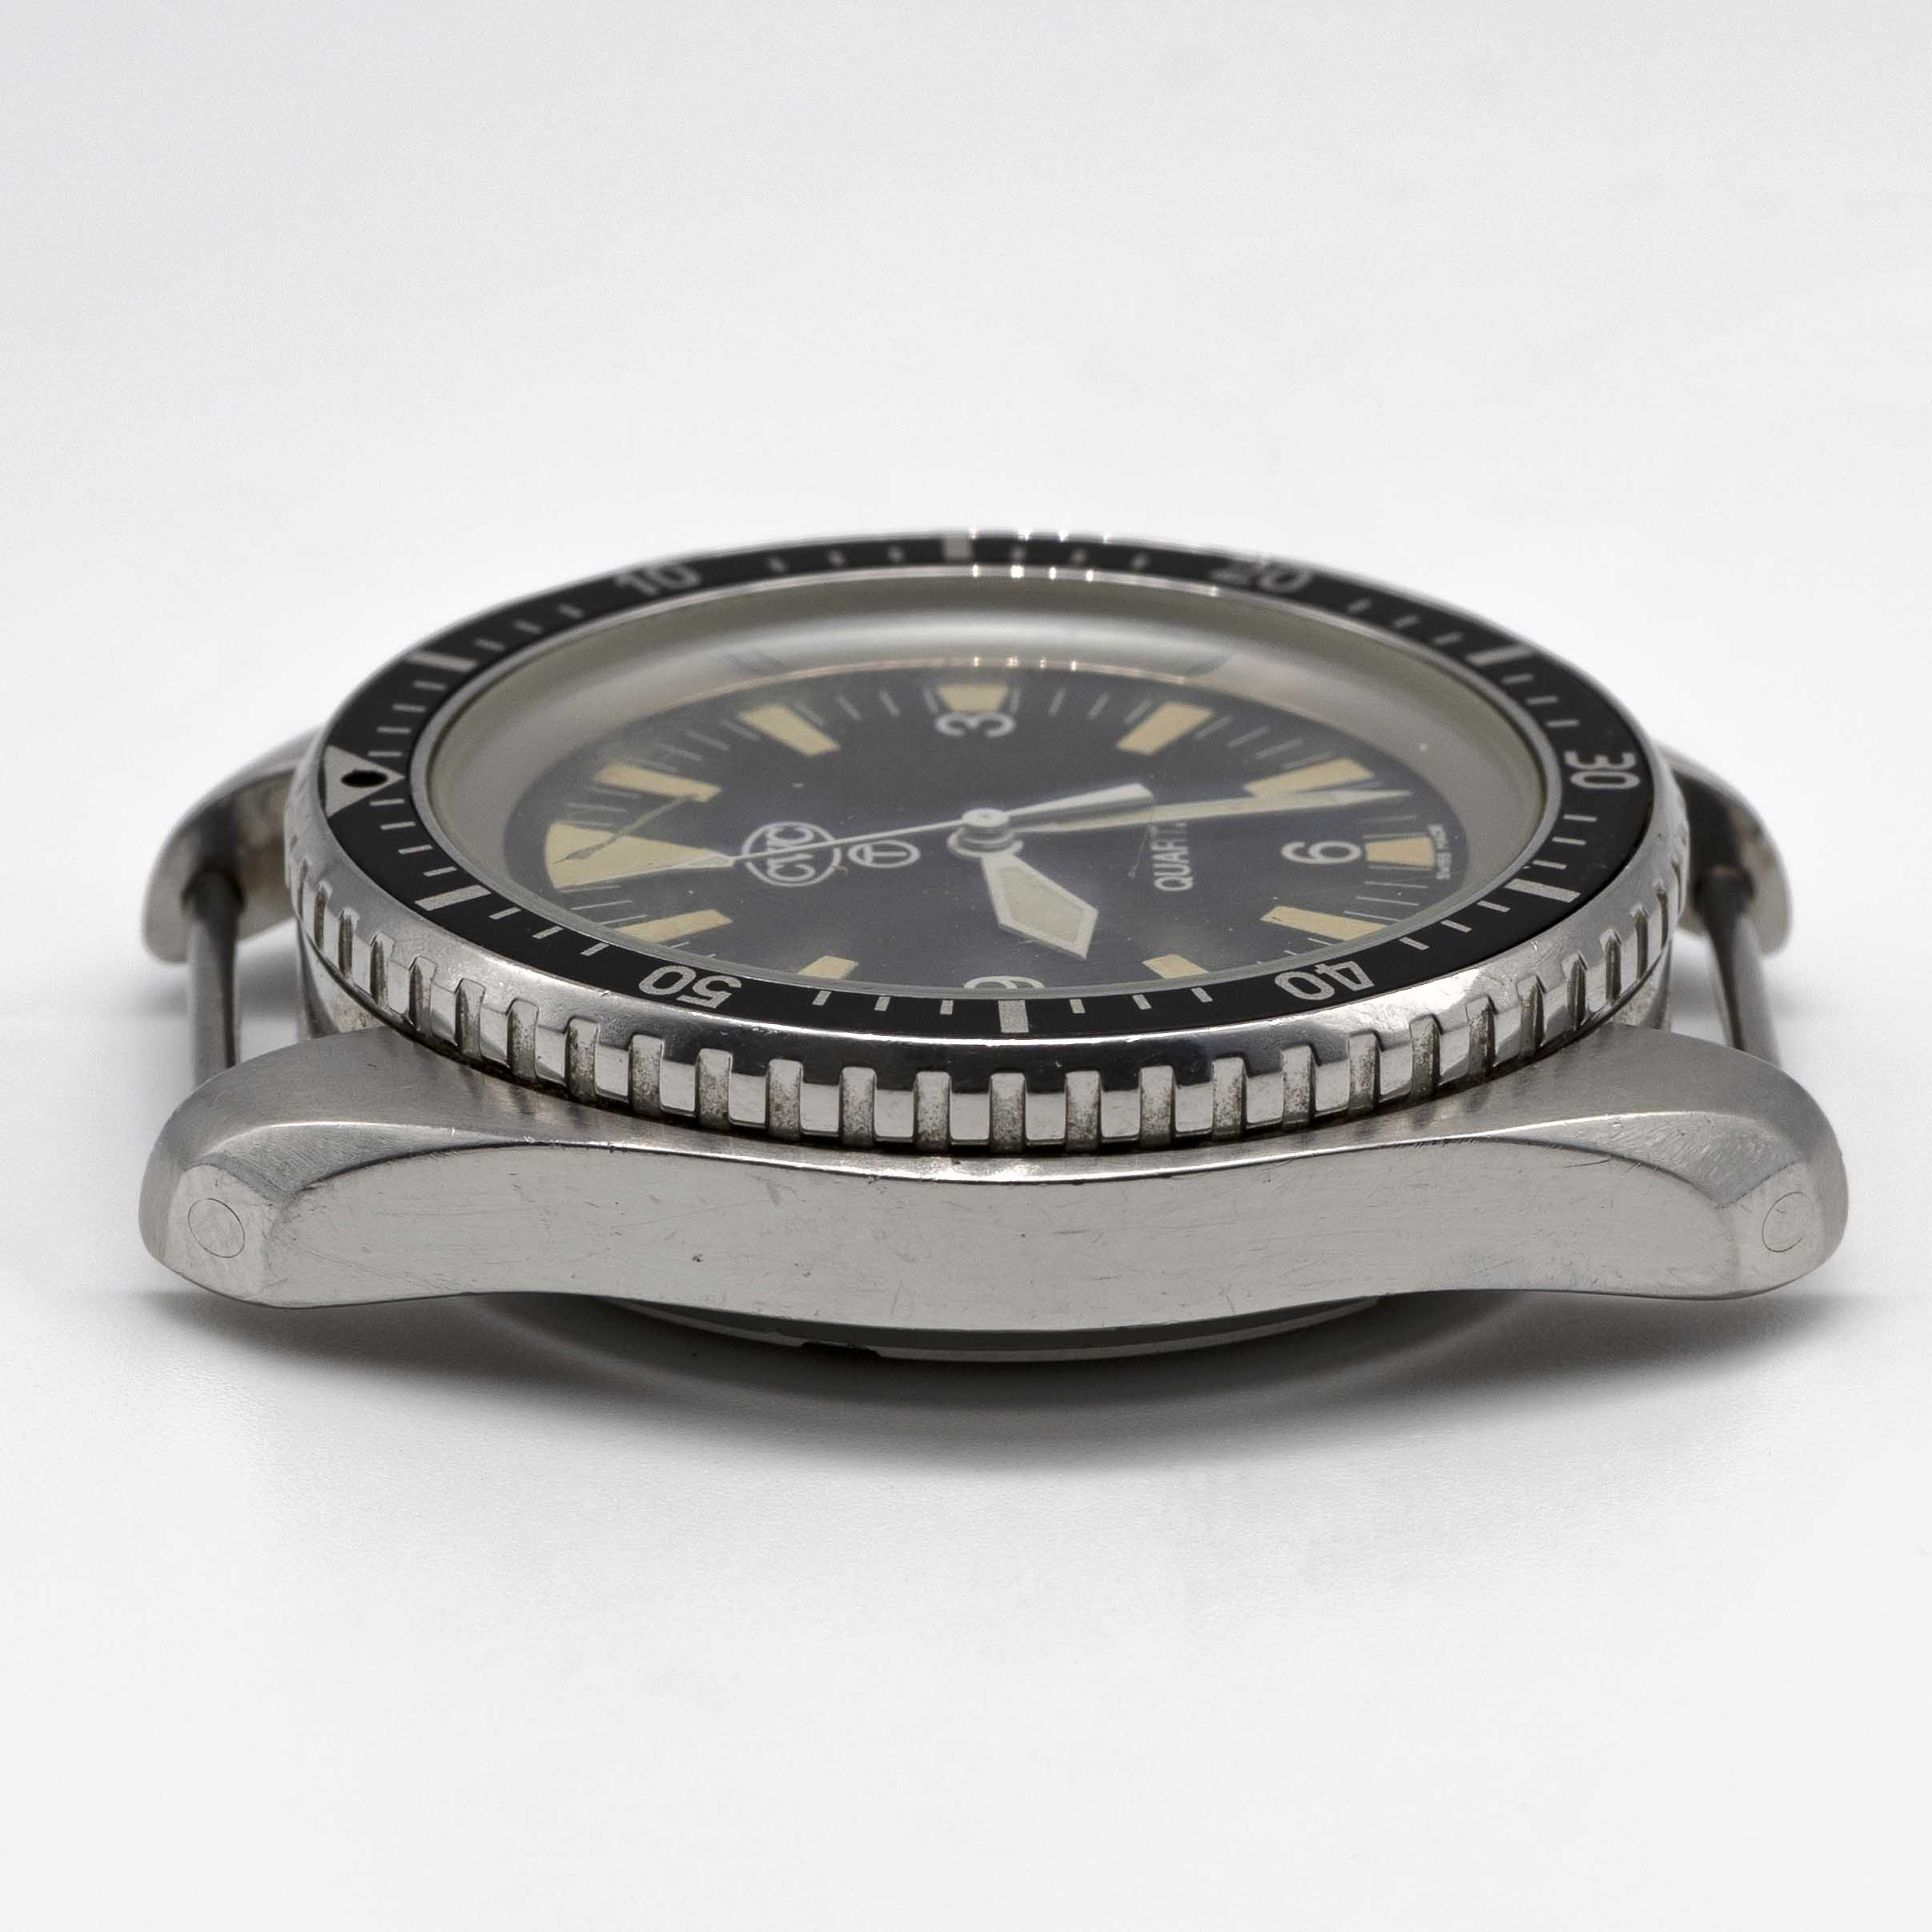 A GENTLEMAN'S STAINLESS STEEL BRITISH MILITARY ISSUED CWC QUARTZ ROYAL NAVY DIVERS WRIST WATCH DATED - Image 8 of 8